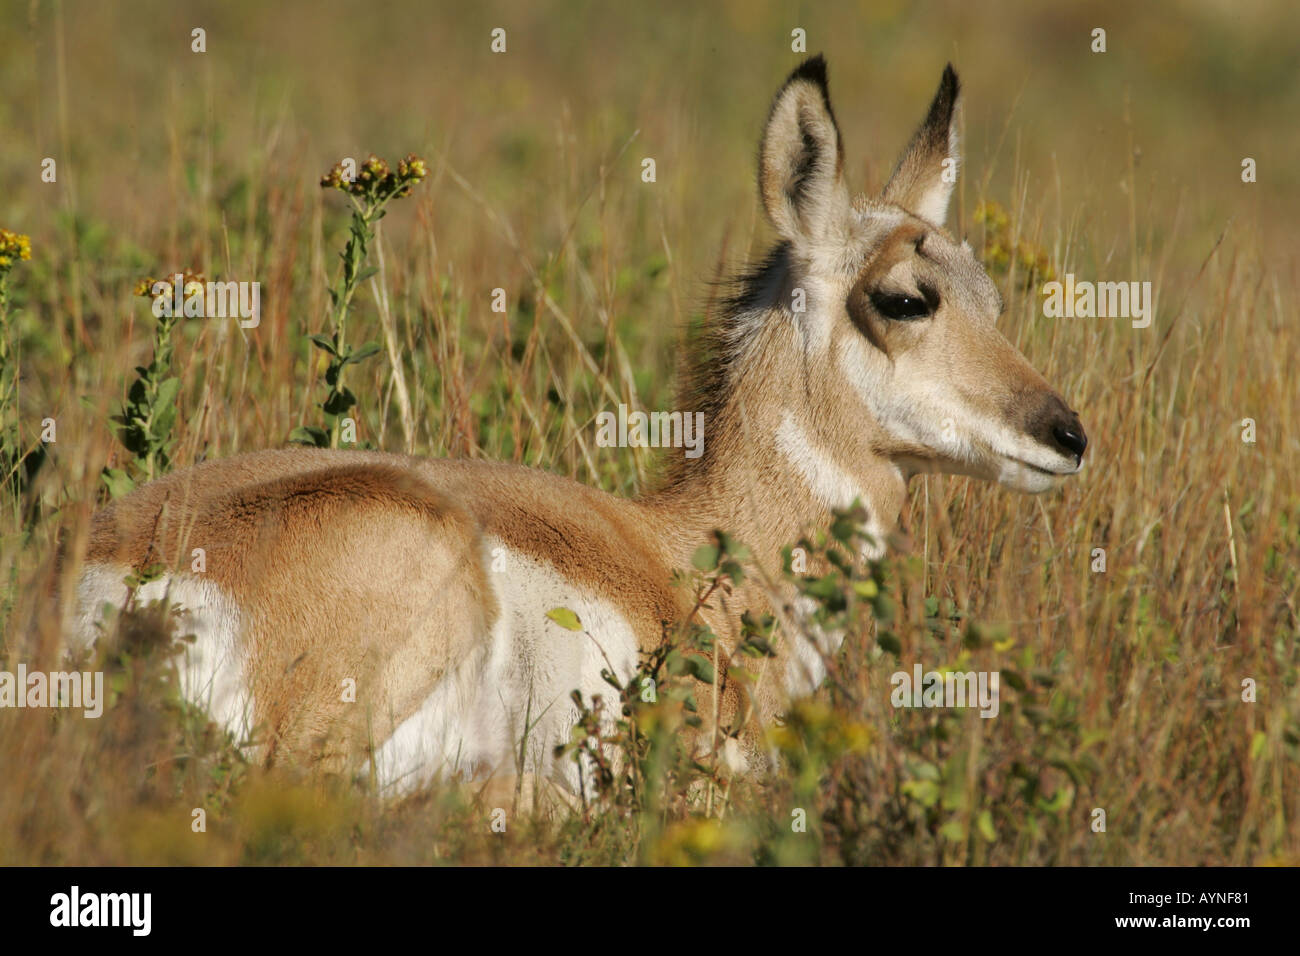 Pronghorn antelope baby lying in grass Stock Photo